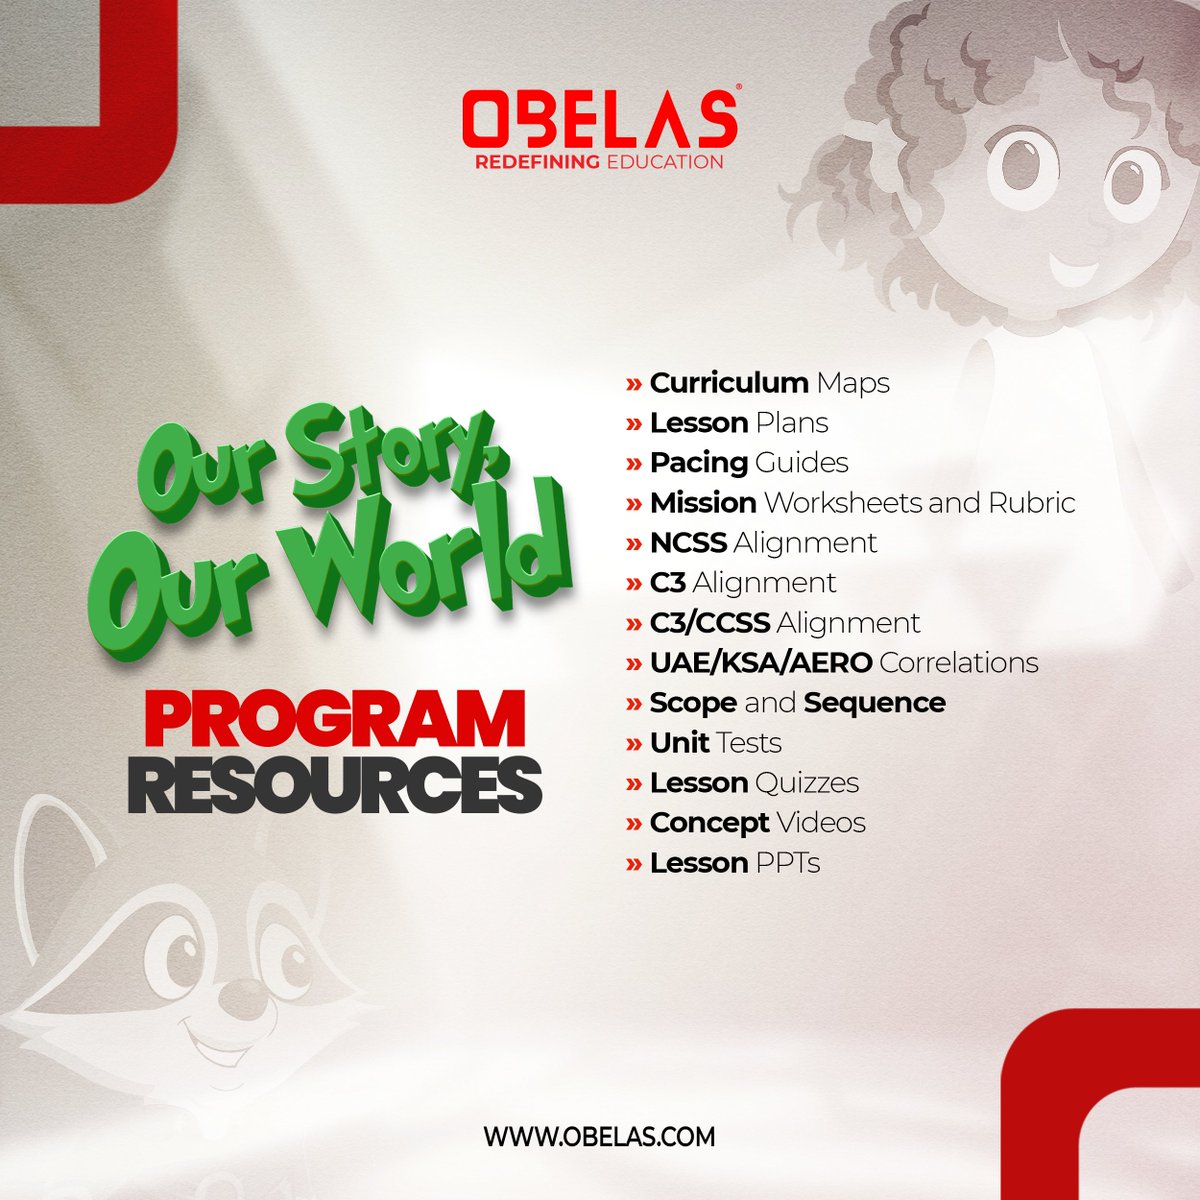 Dive into grades 1-5 Social Studies with us! 🌍 Our resources, from Curriculum Maps to Concept Videos, are designed to engage and align with C3/NCSS standards. Empower your teaching journey now! Learn more, shorturl.at/dhsT5 #OBELAS #SocialStudies #RedefiningEducation